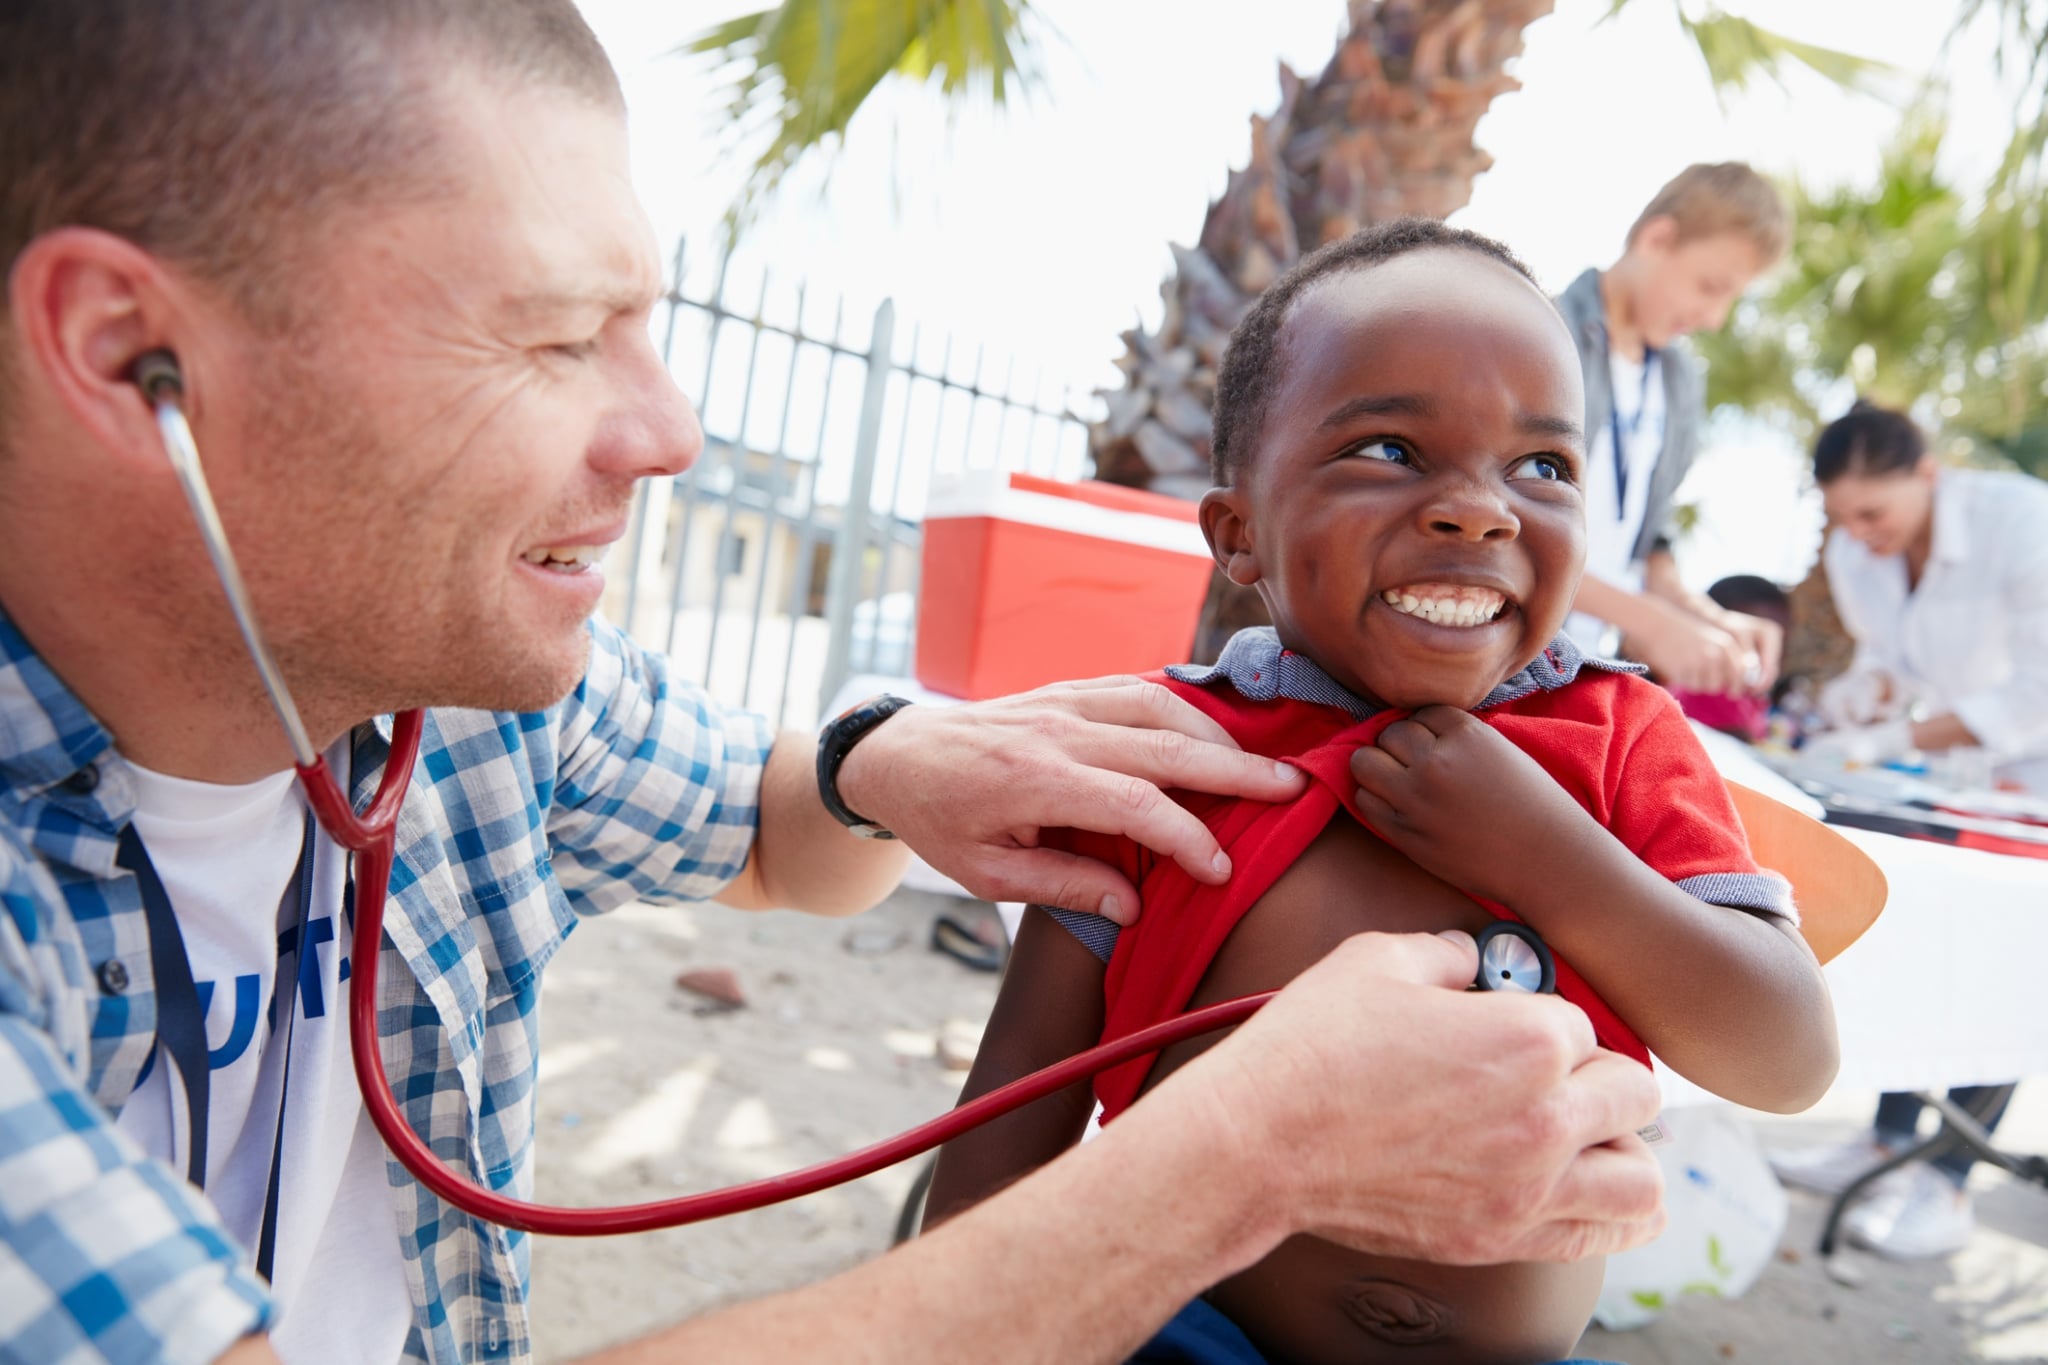 mission trips for nursing students